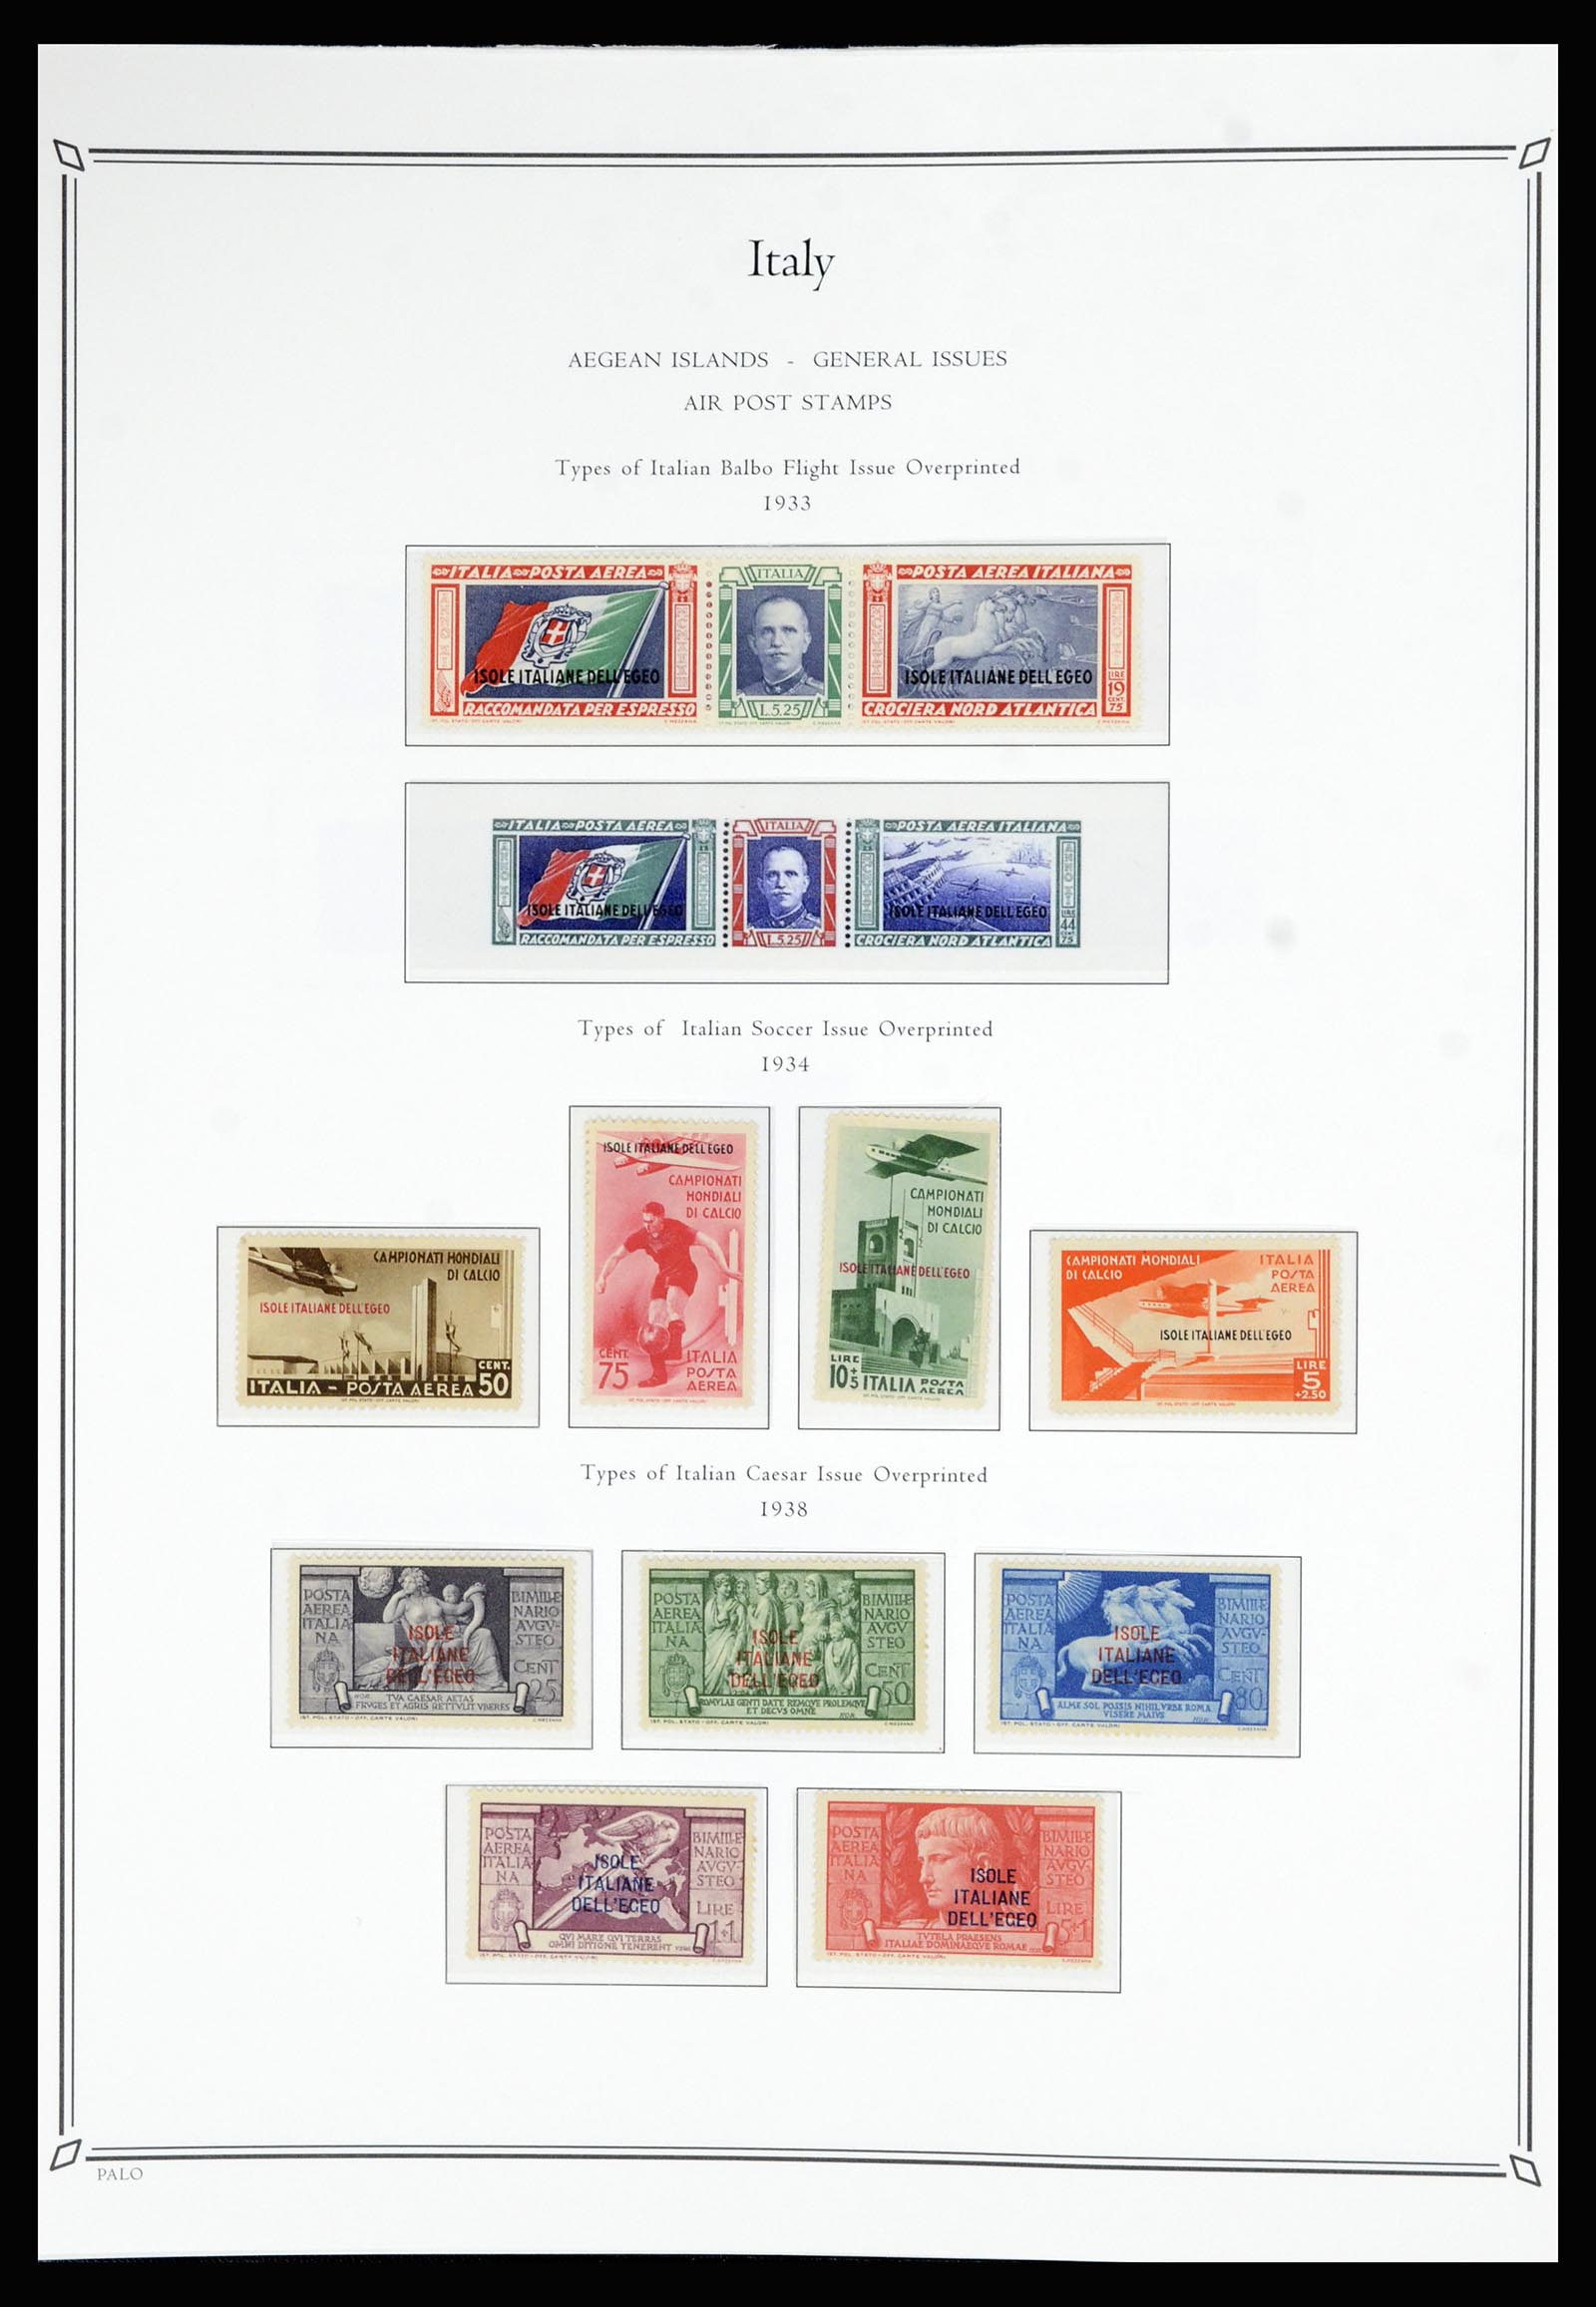 36786 211 - Stamp collection 36786 Italy and Aegean Islands 1860-1990.